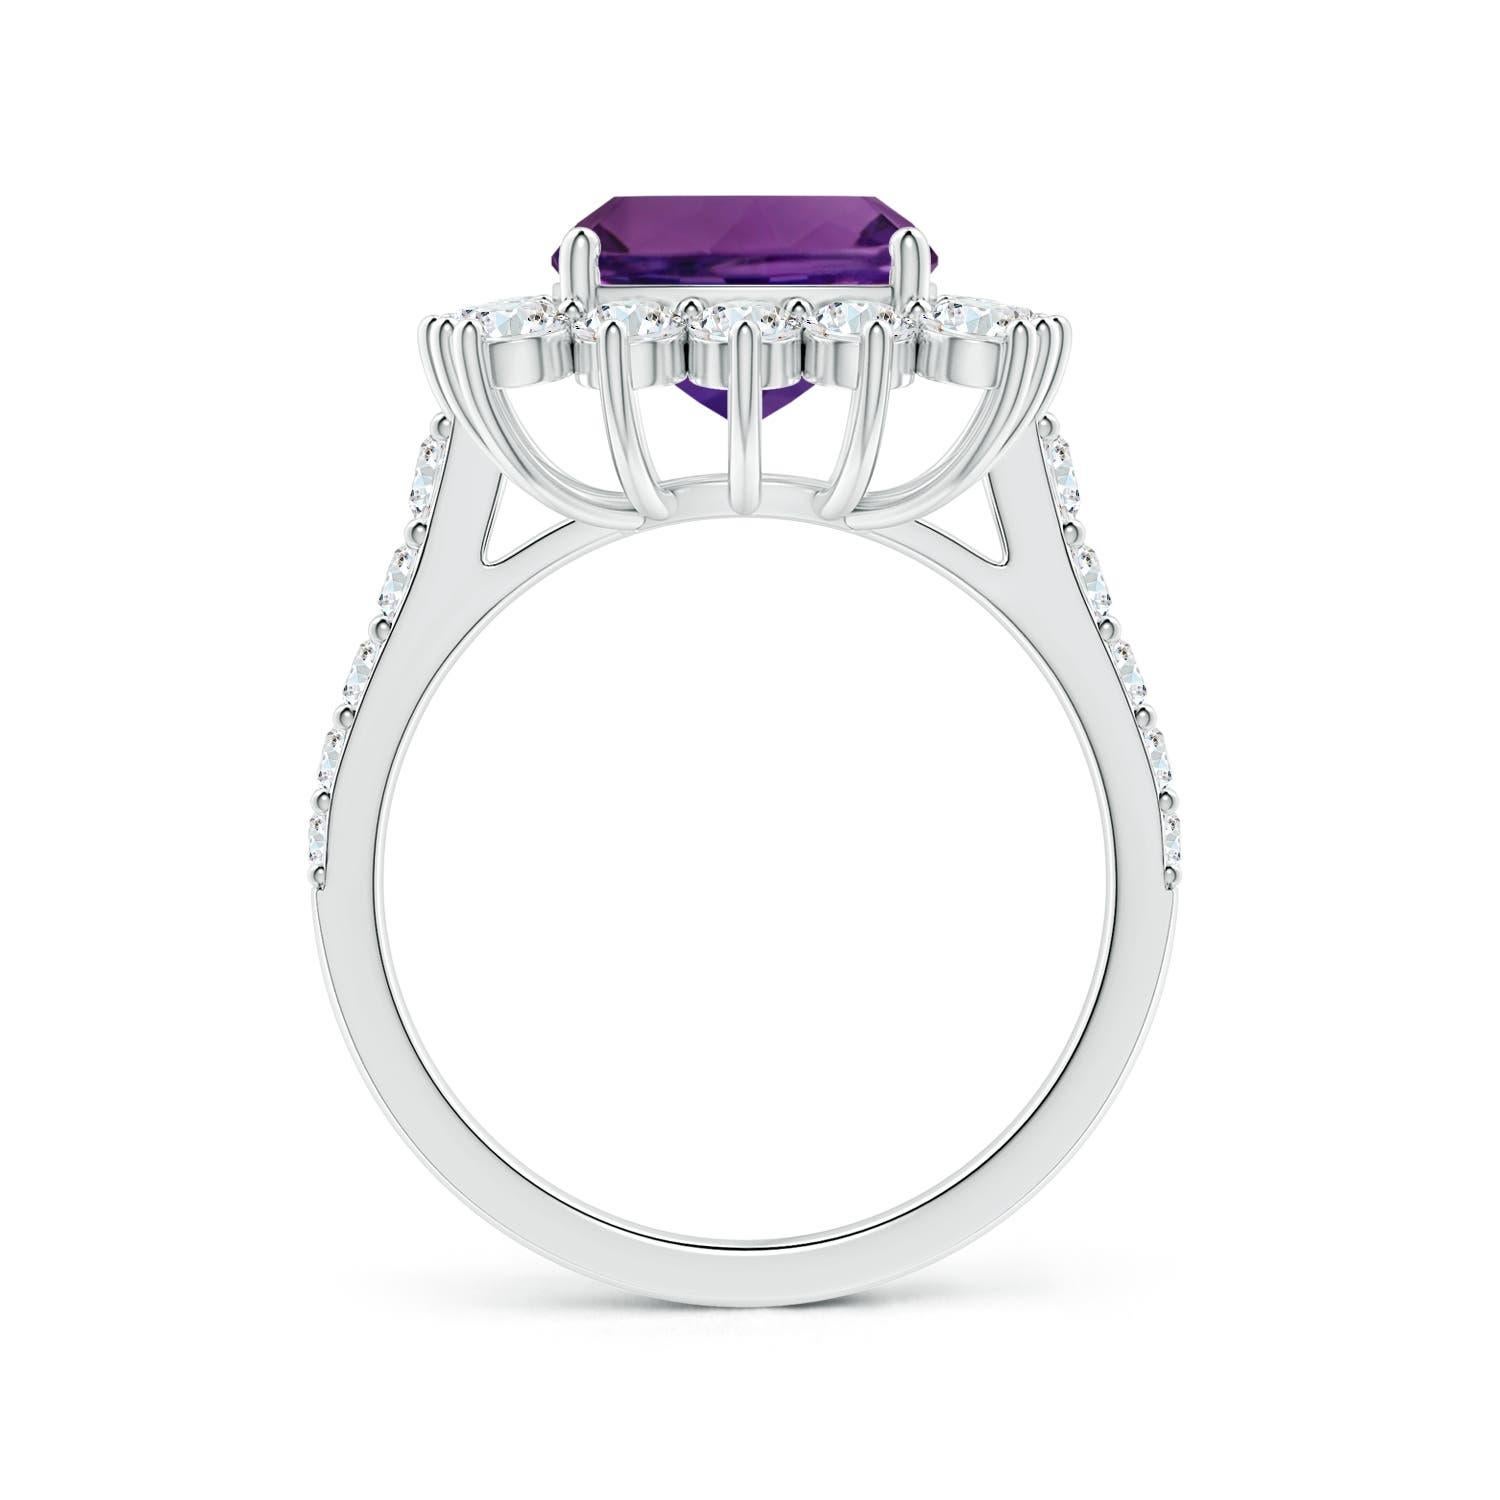 For Sale:  Angara Princess Diana Inspired Gia Certified Cushion Amethyst Ring in Platinum 2